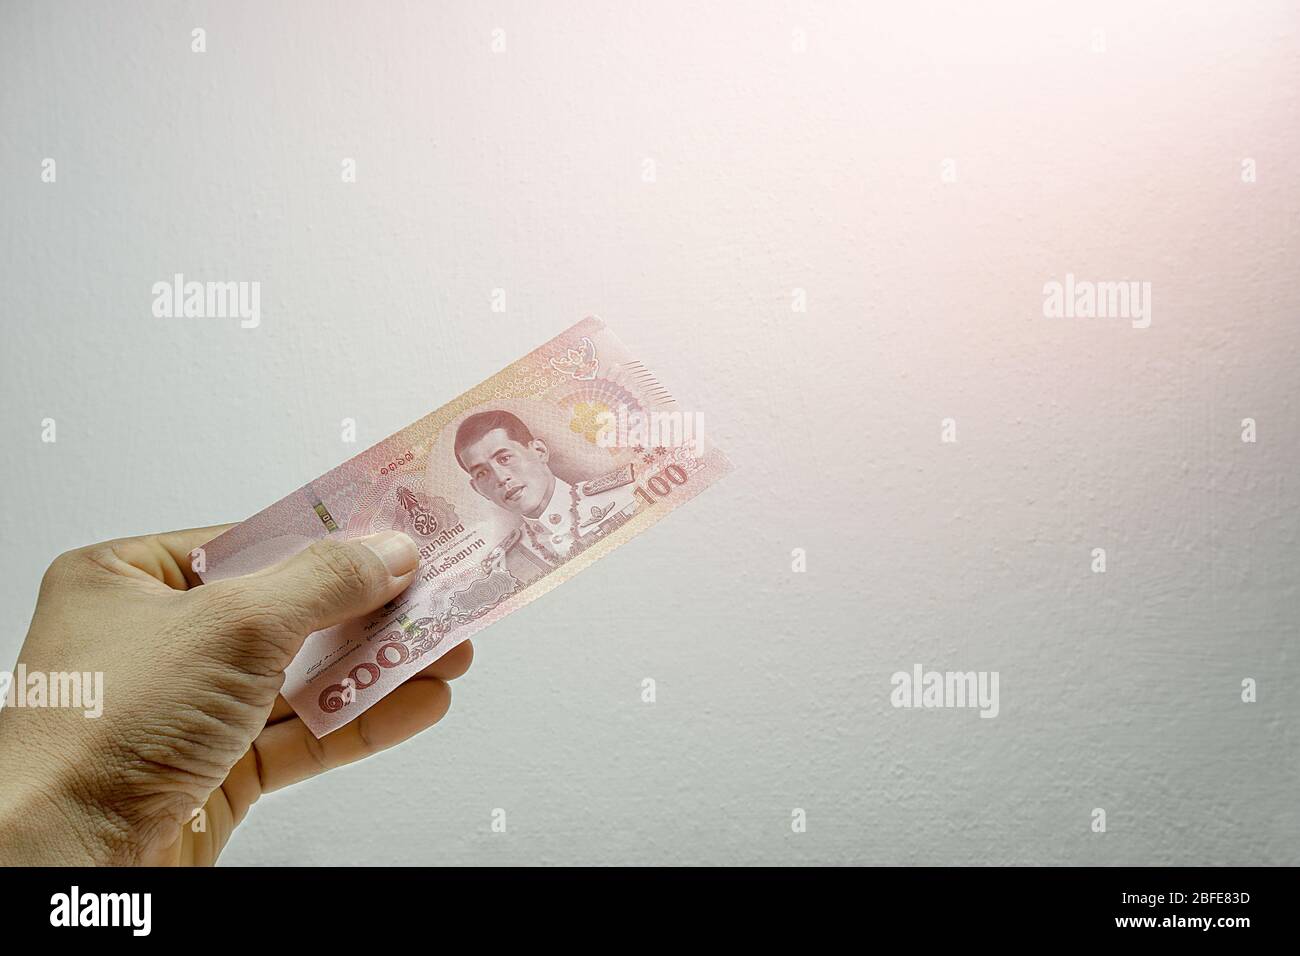 A mans hand is holding one 100 bank notes on a white background. Concept Thai baht currency banknote Stock Photo